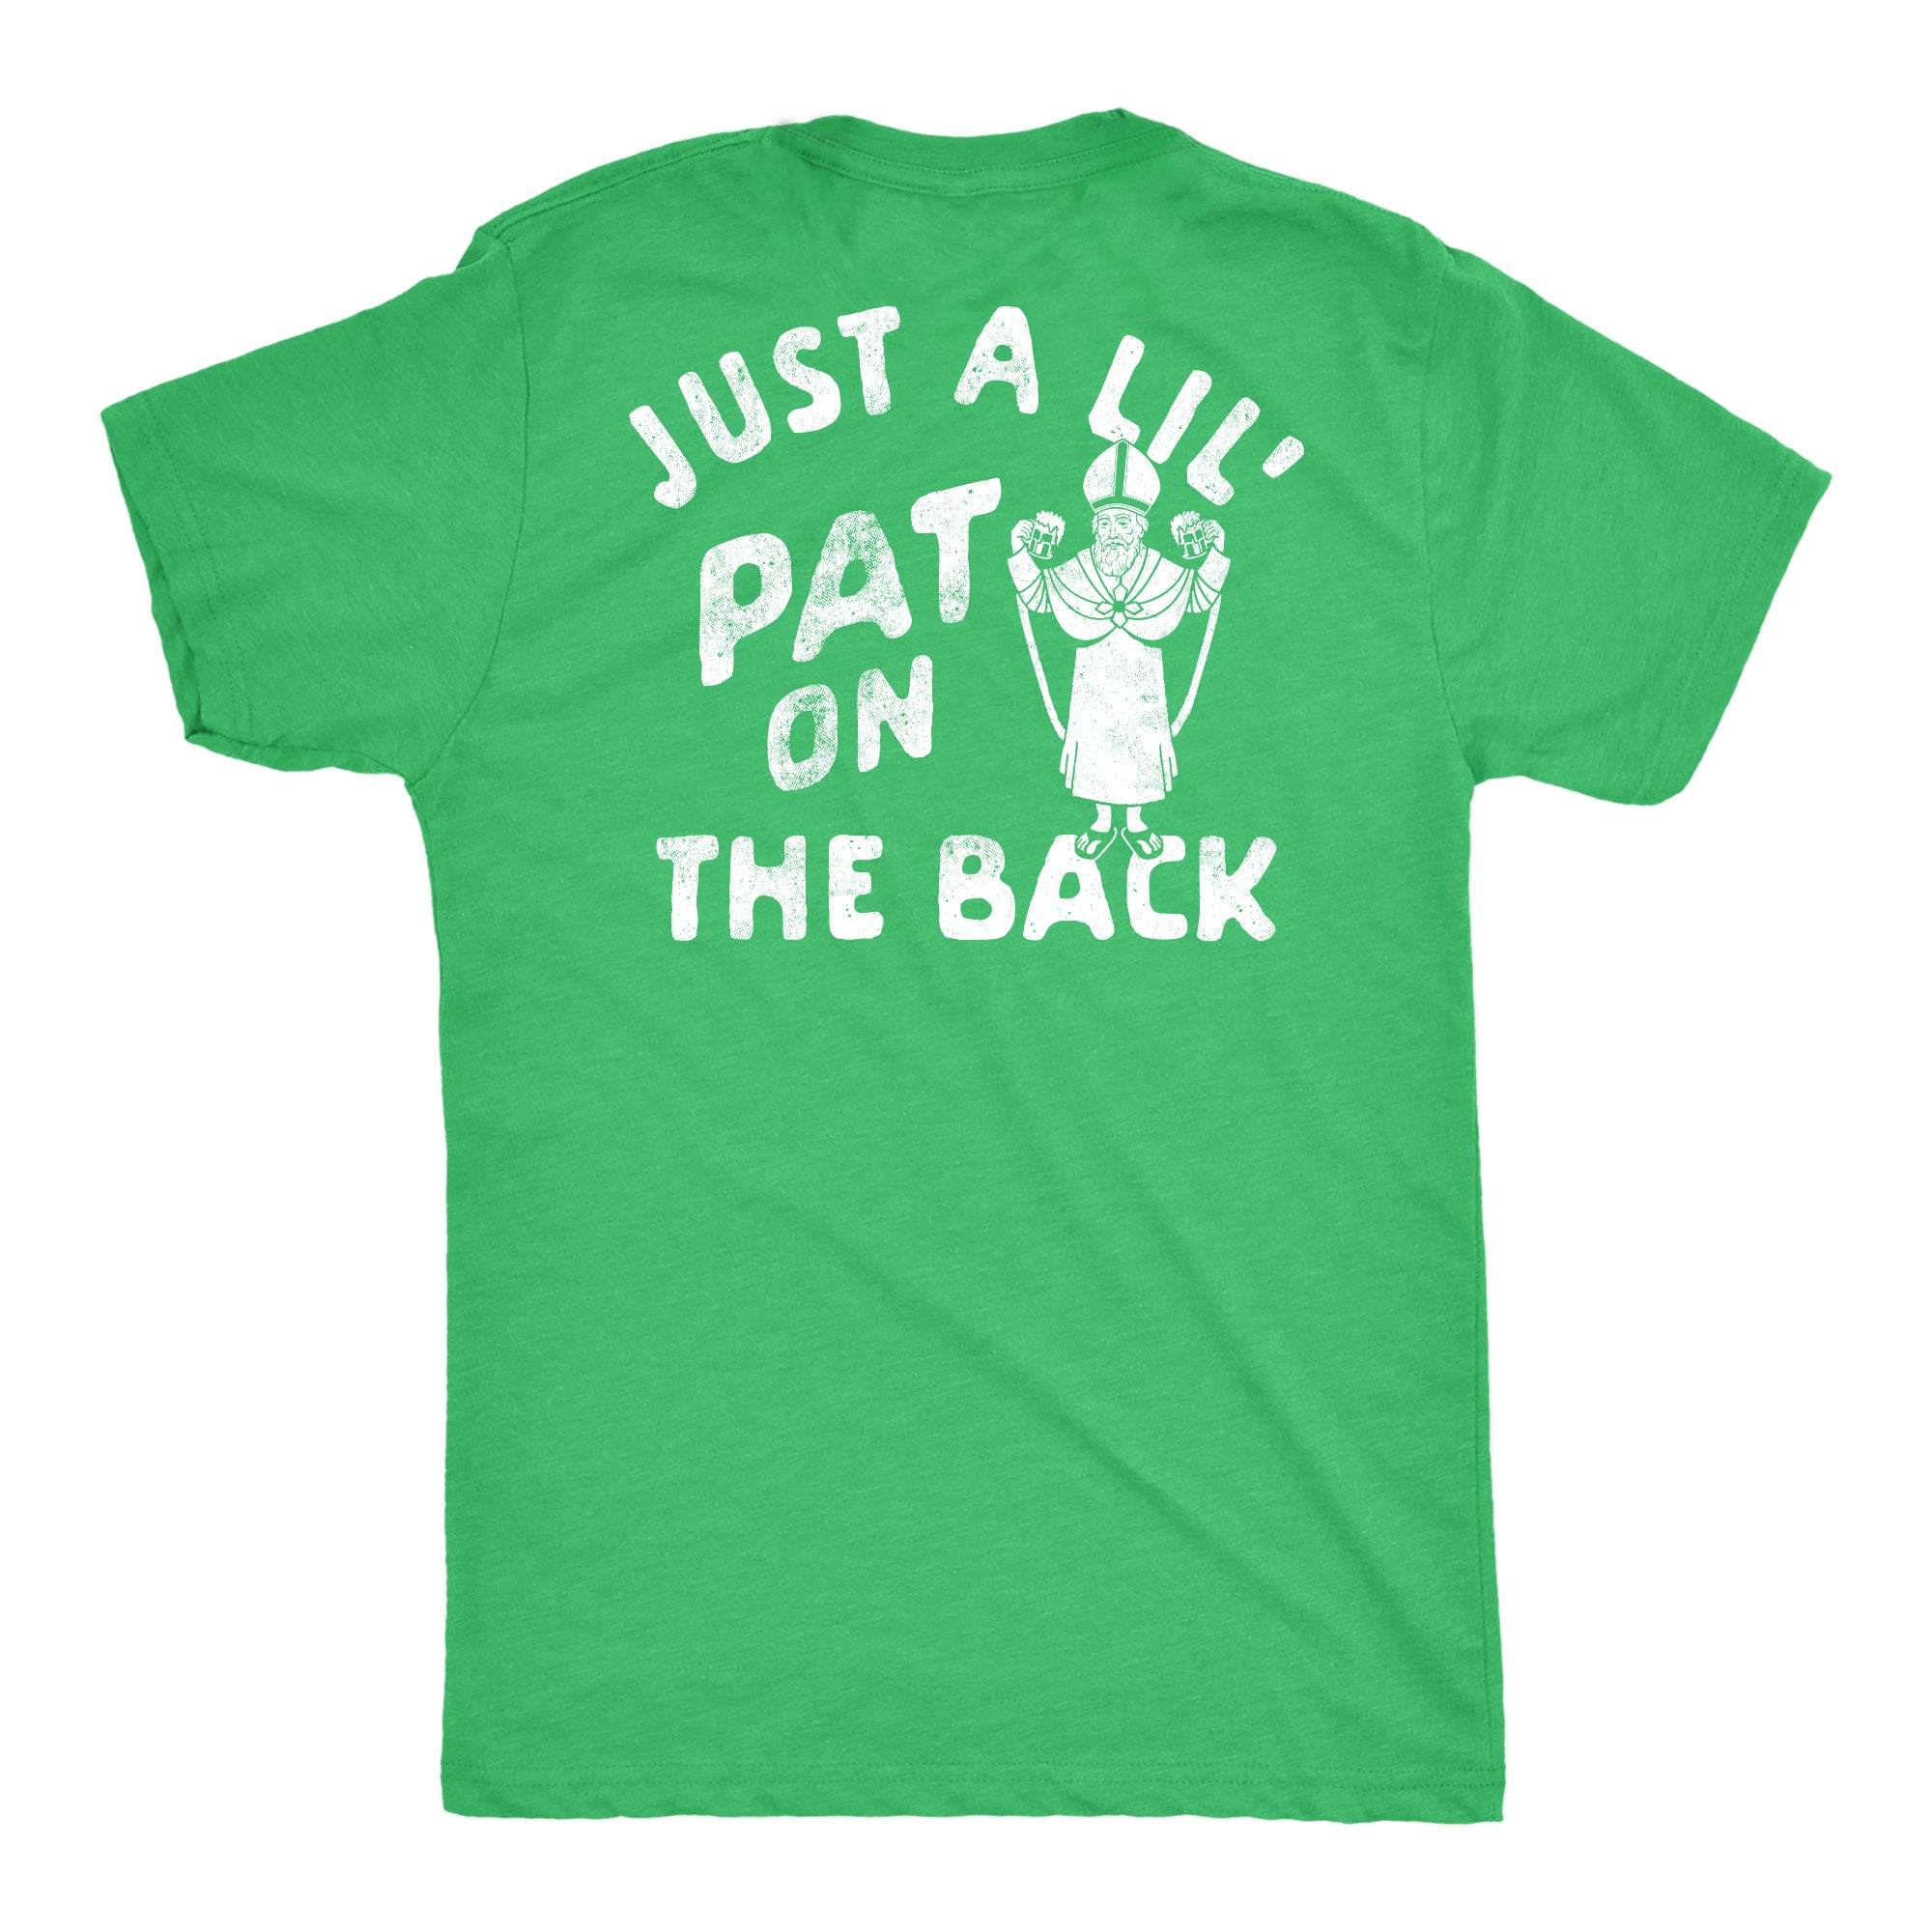 Funny Heather Green - Pat On The Back Just A Lil Pat On The Back Mens T Shirt Nerdy Saint Patrick's Day Sarcastic Tee